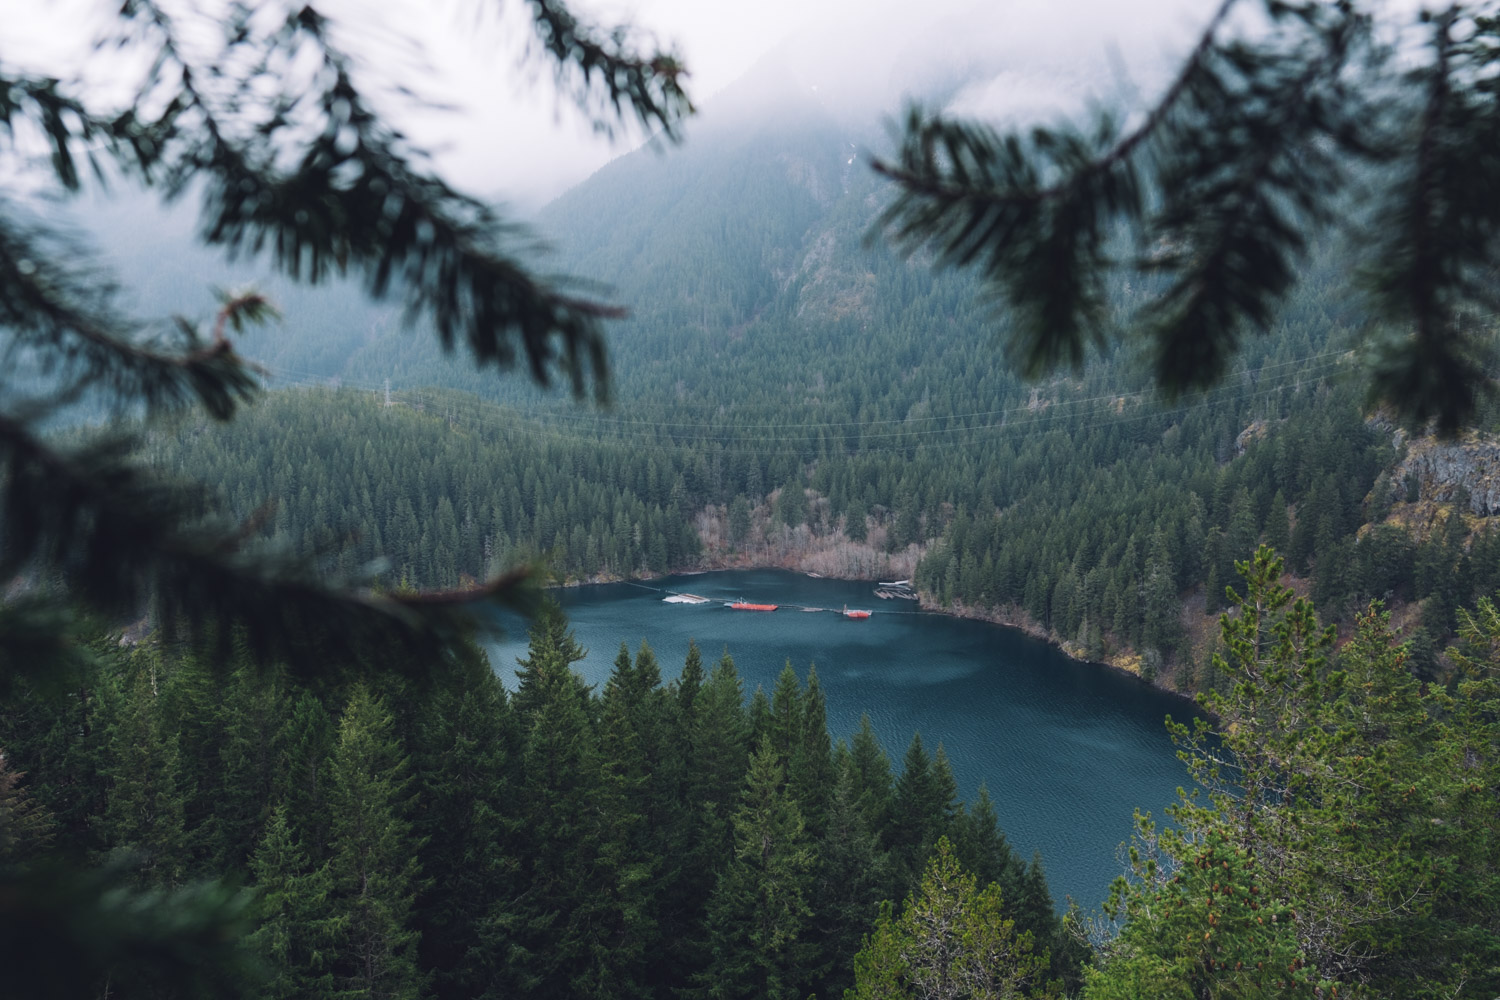 Photos: Diablo Lake is one of the premiere spots to visit in the North